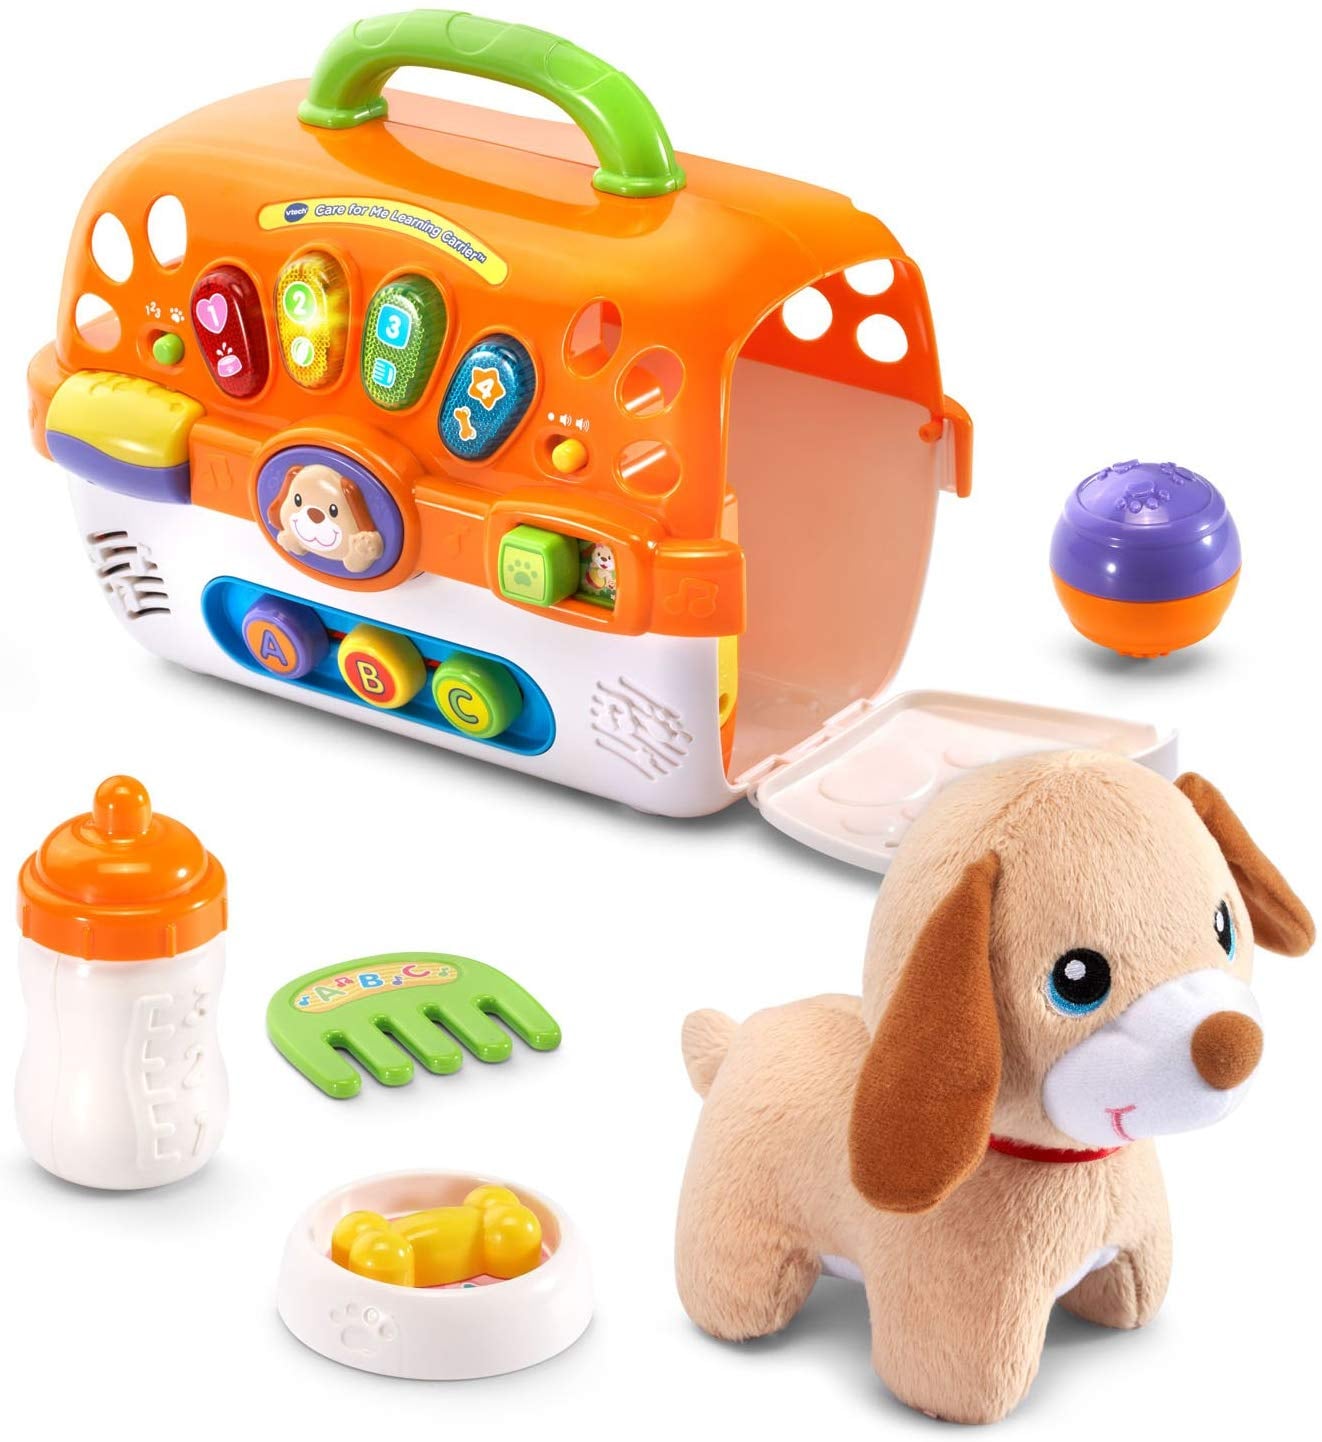 26 of the Best Toys and Gift Ideas a 1-Year-Old in 2021 |